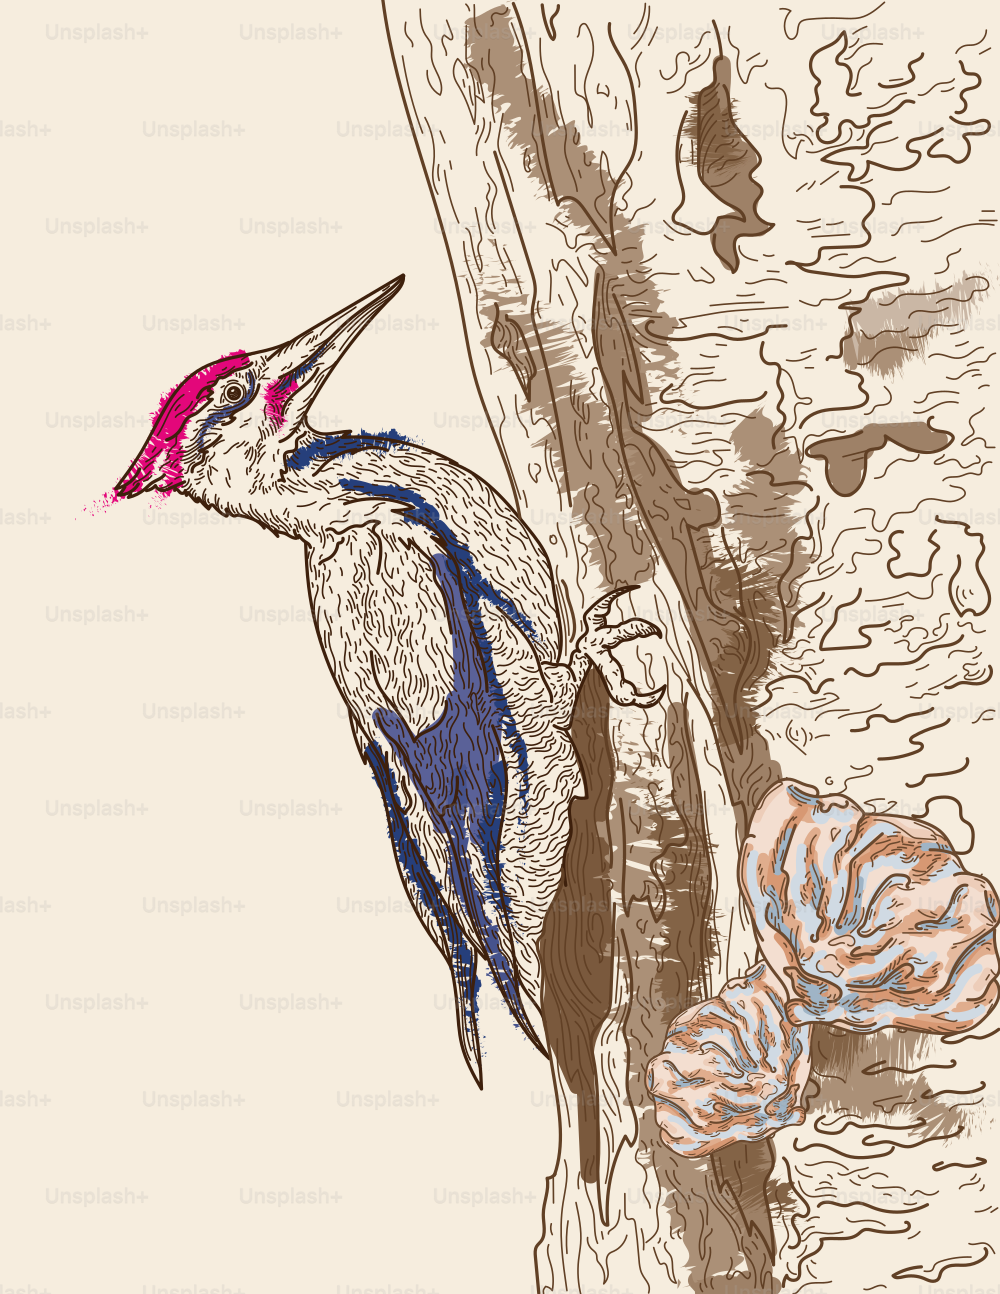 Highly detailed line artwork of a pileated woodpecker perched on the side of a tree.